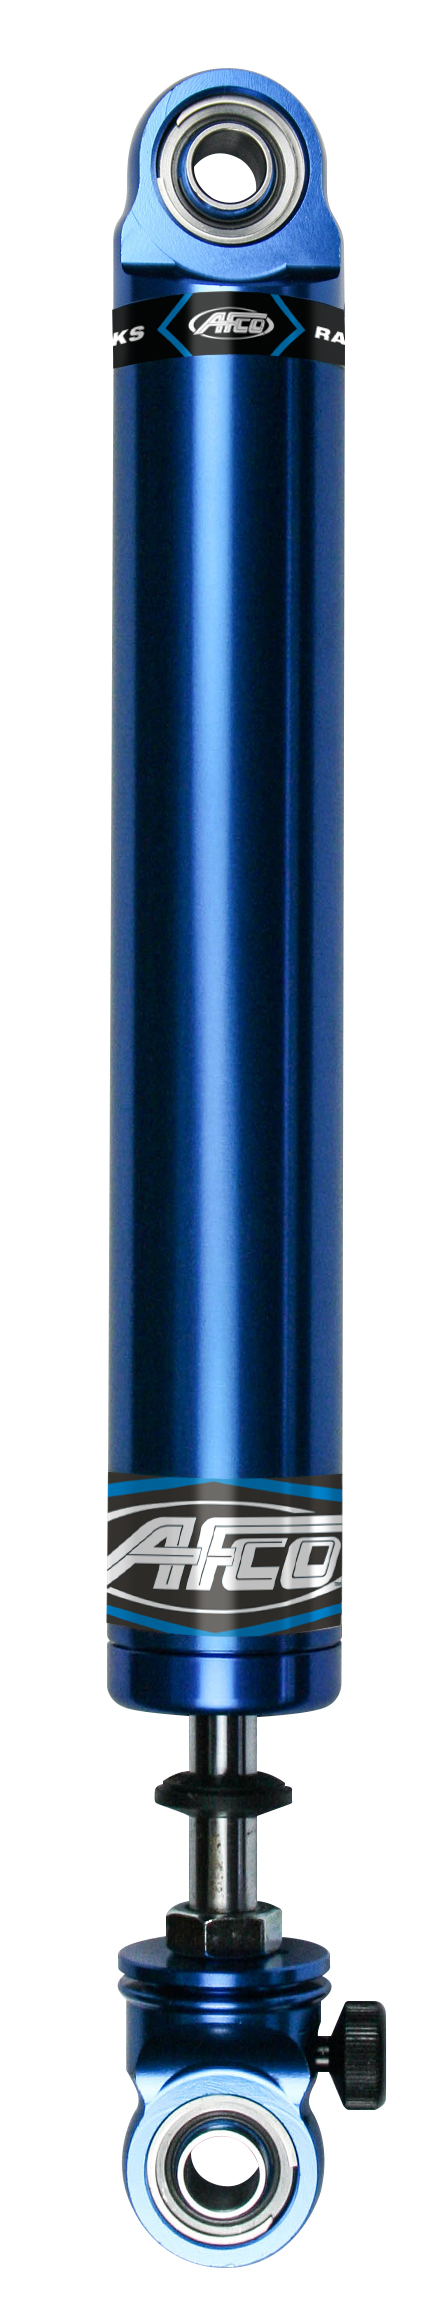 Aluminum Shock Twin Tube 16 Series Small Body 7 Inch Comp 2/Reb 4-8 Smooth